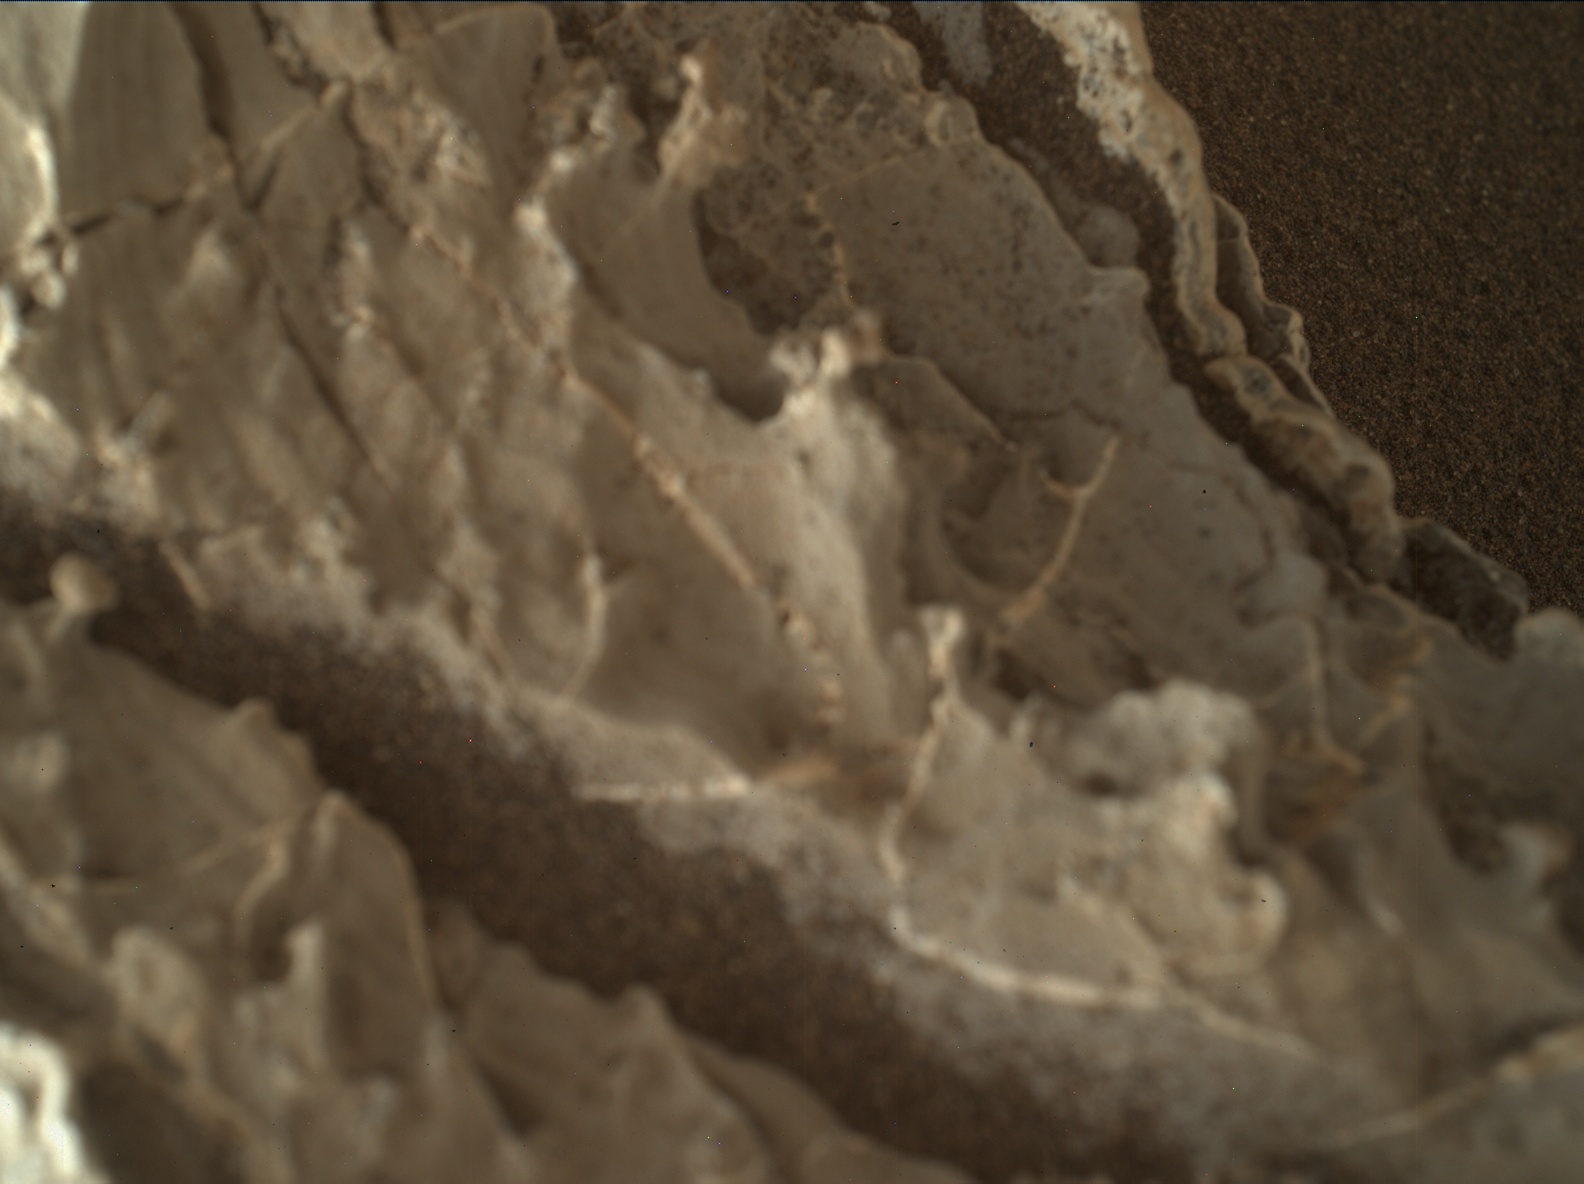 Nasa's Mars rover Curiosity acquired this image using its Mars Hand Lens Imager (MAHLI) on Sol 1963